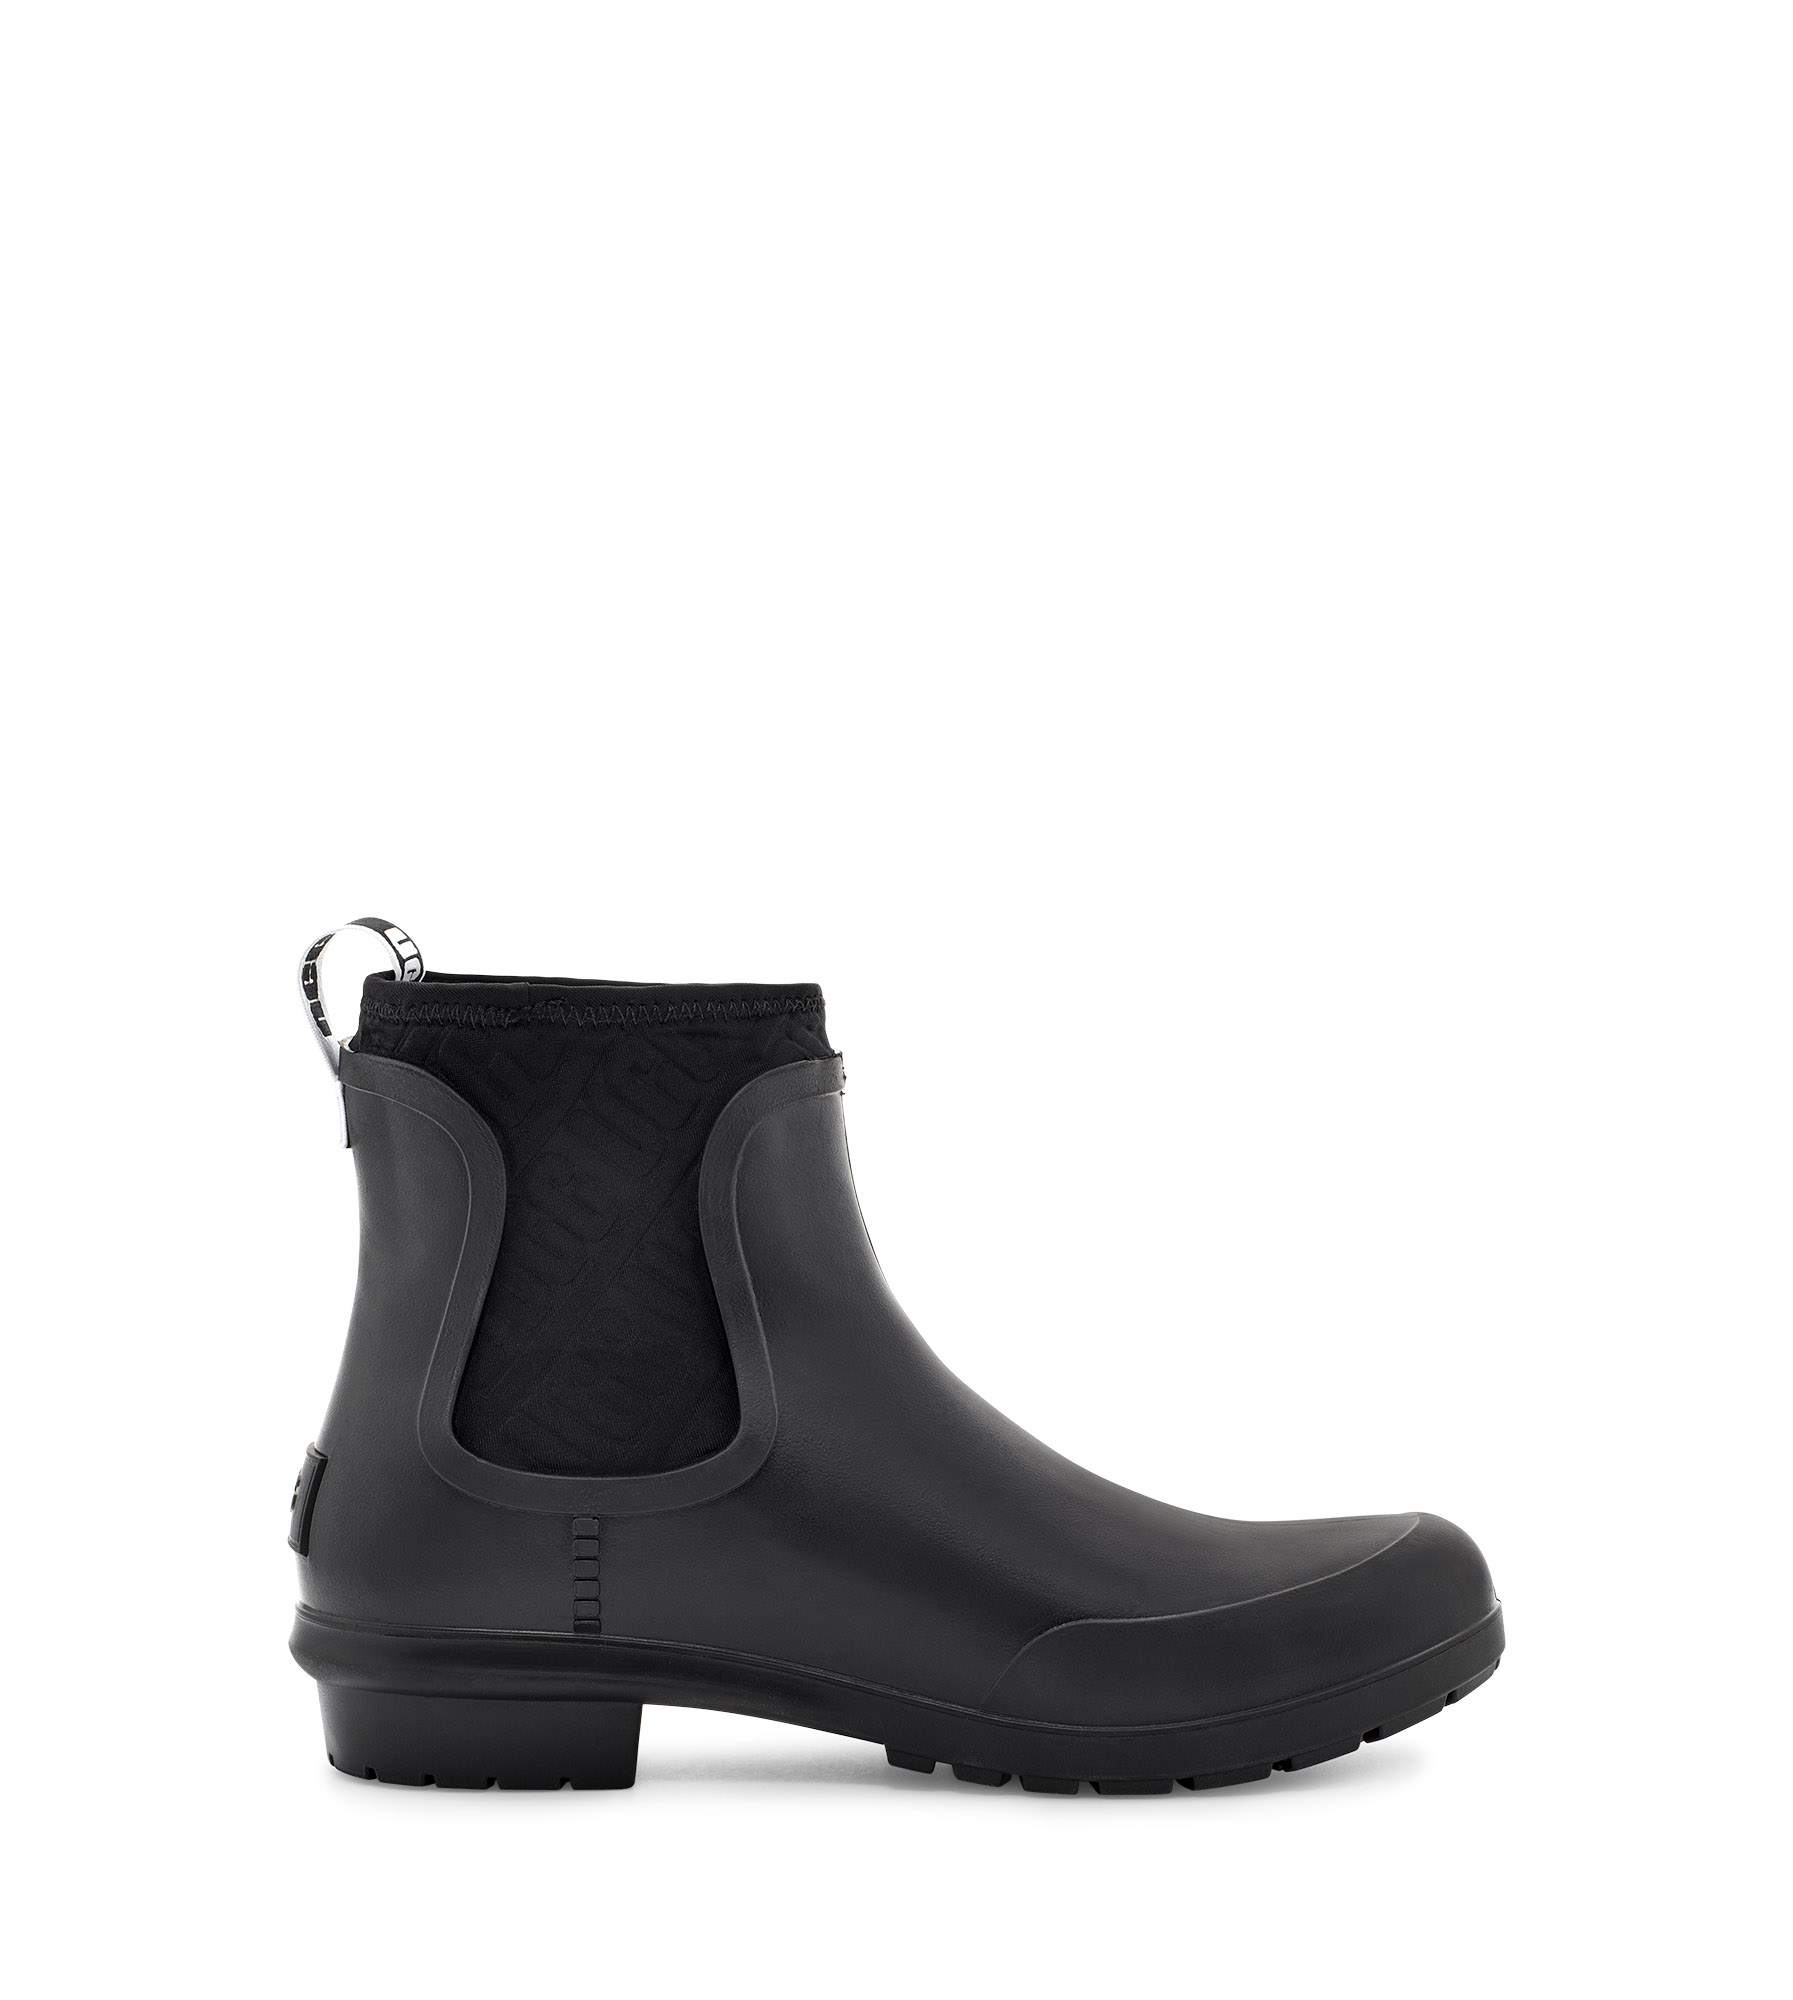 UGG Chevonne Bottes pour Femme in Black, Taille 37, Shearling product